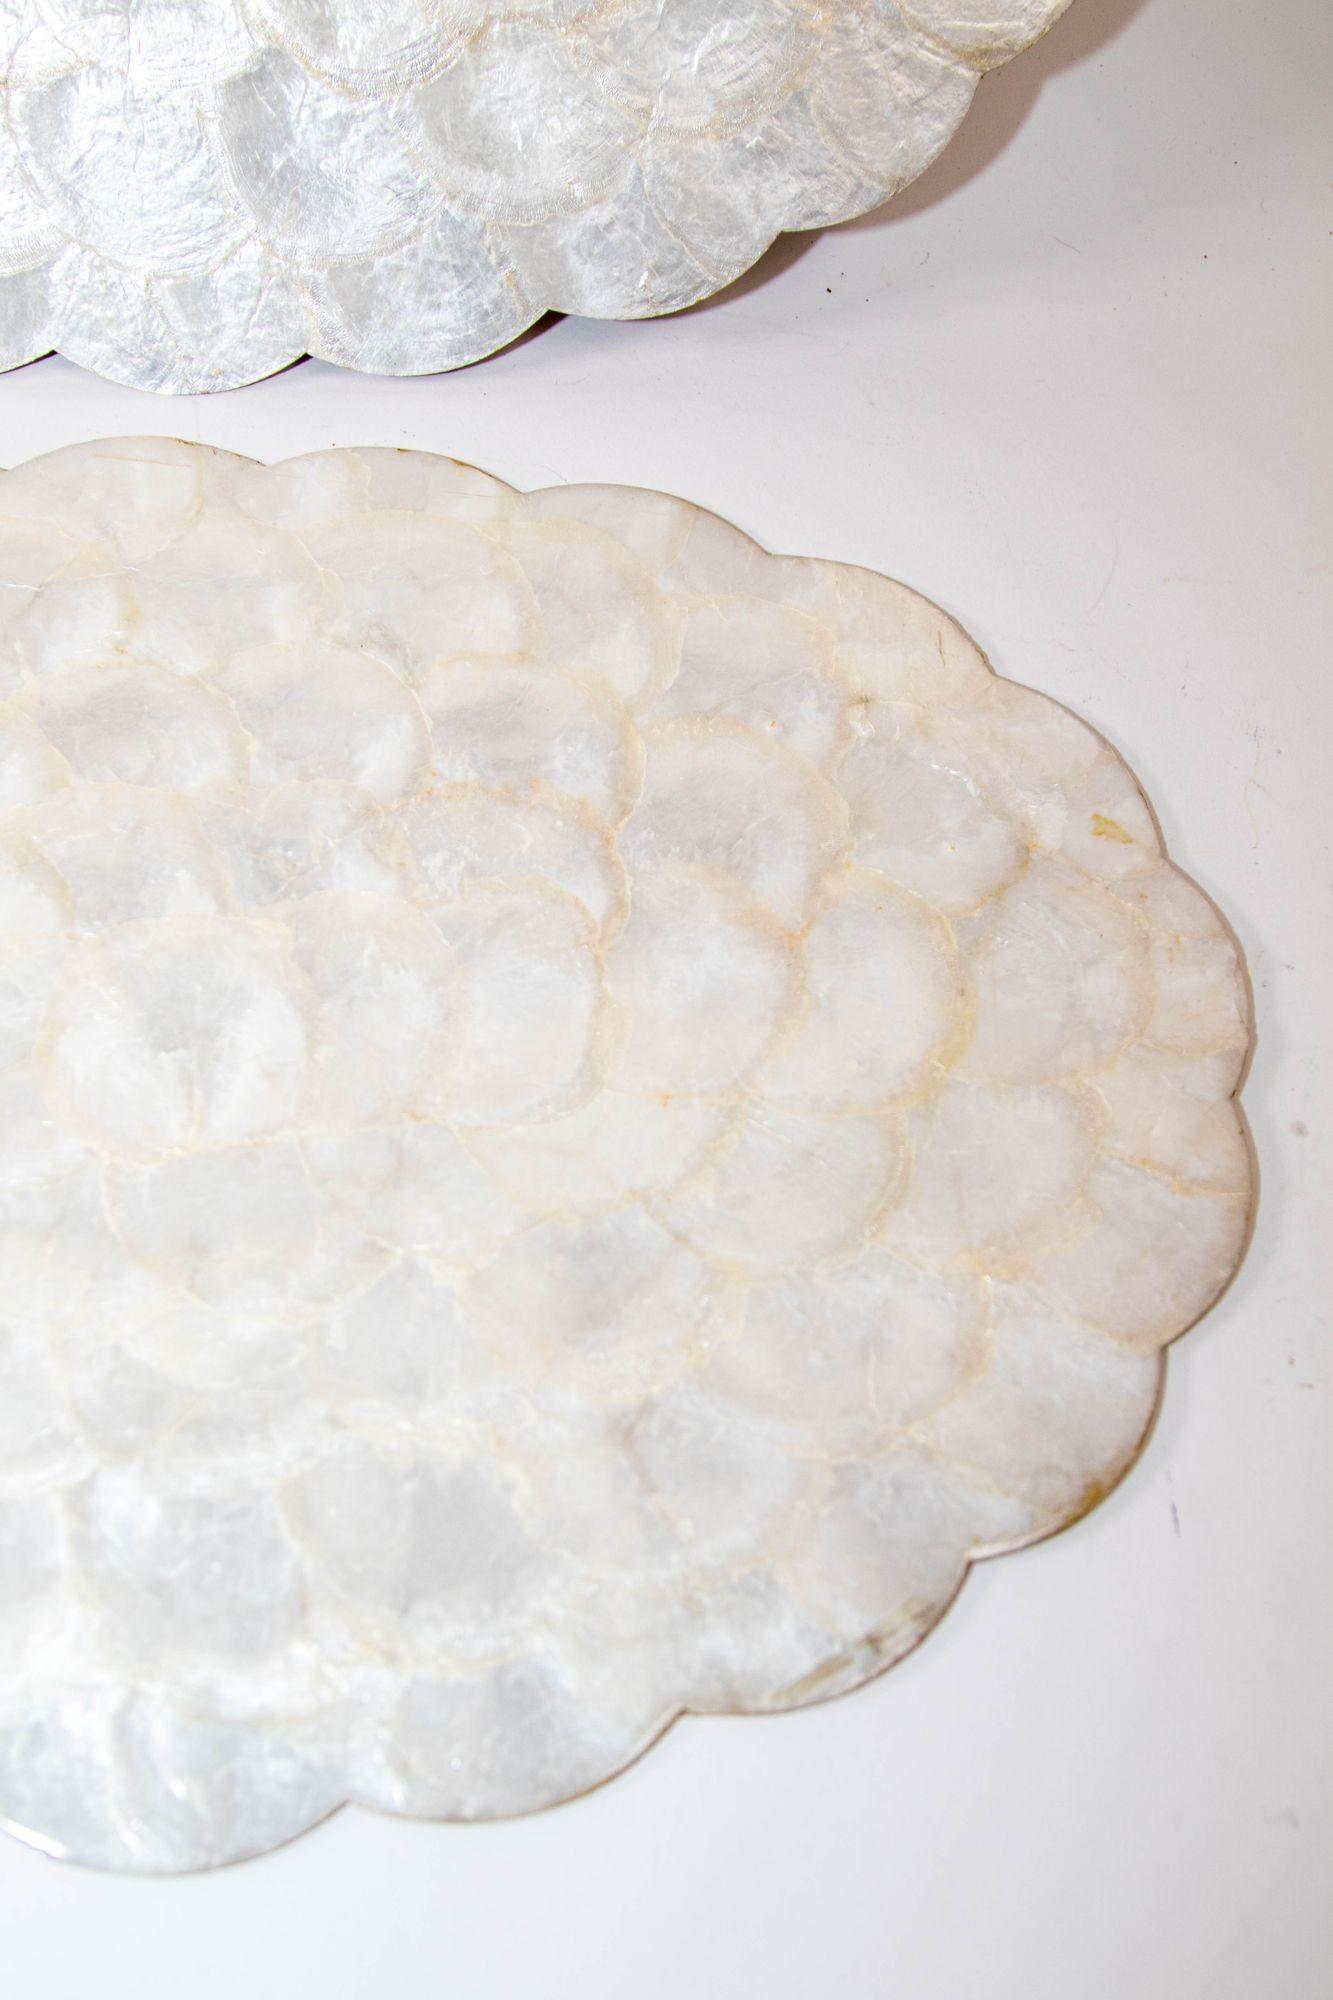 Eggshell Vintage Hallie St Mary 2 Placemats in Natural Capiz Pearl Shell Scalloped Edge